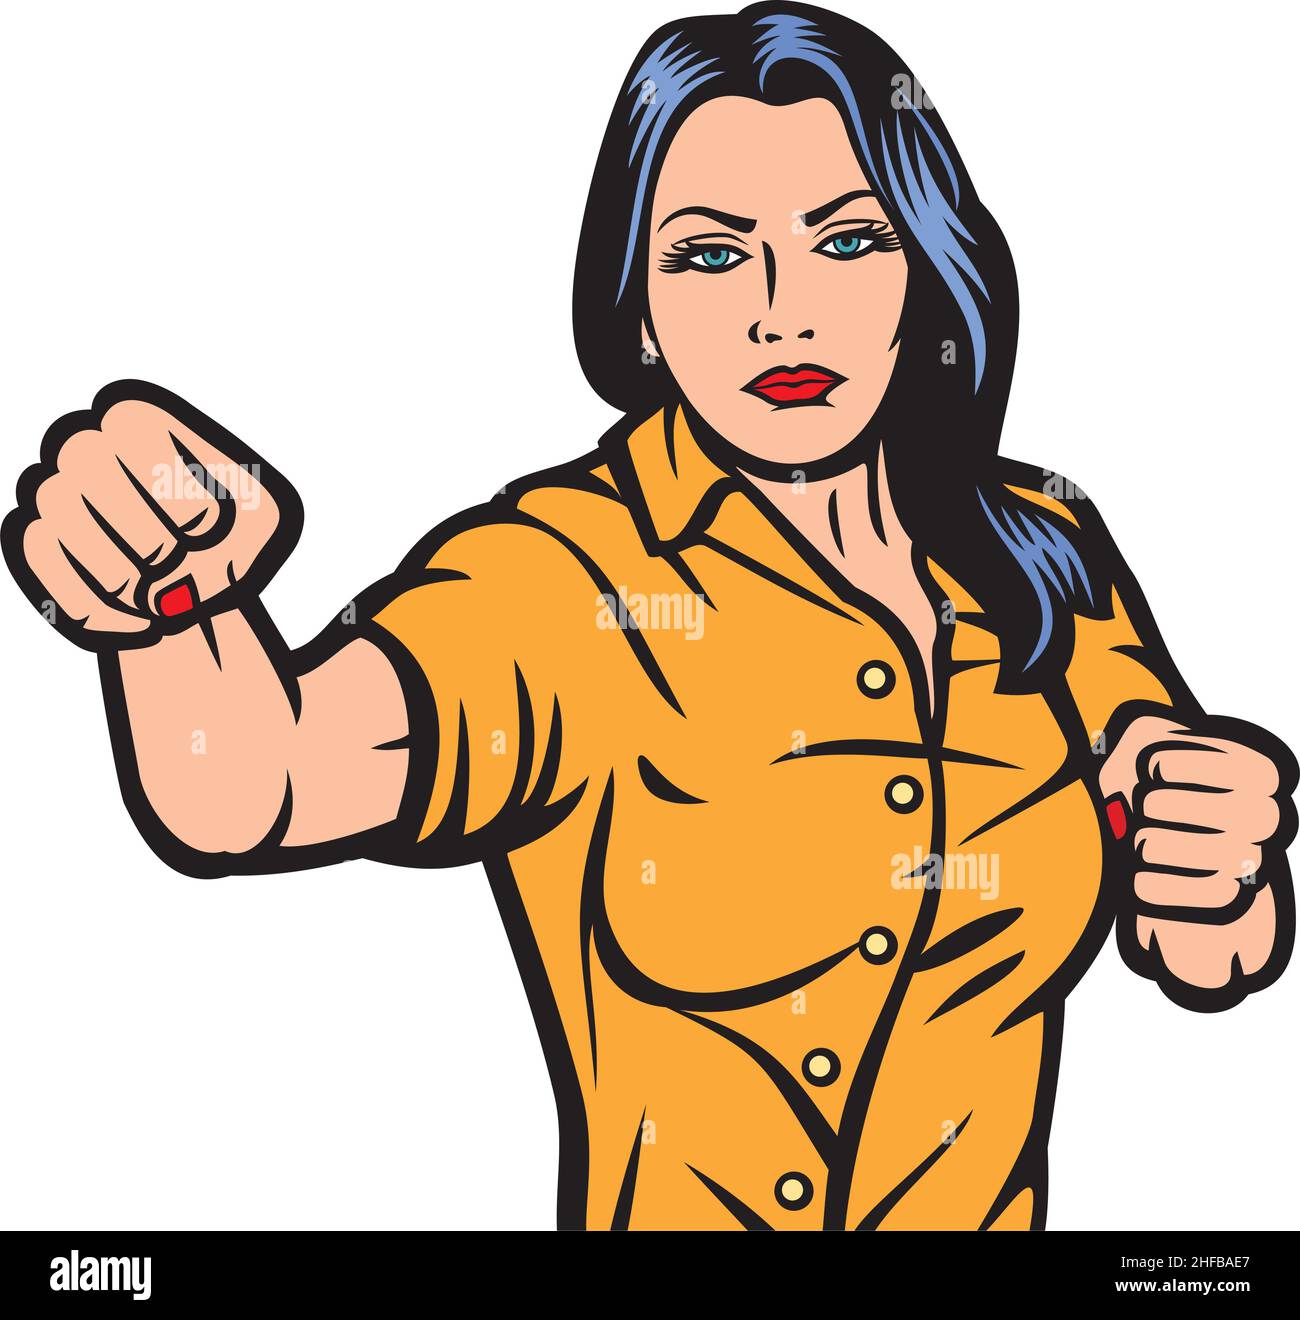 Woman punching color vector illustration Stock Vector